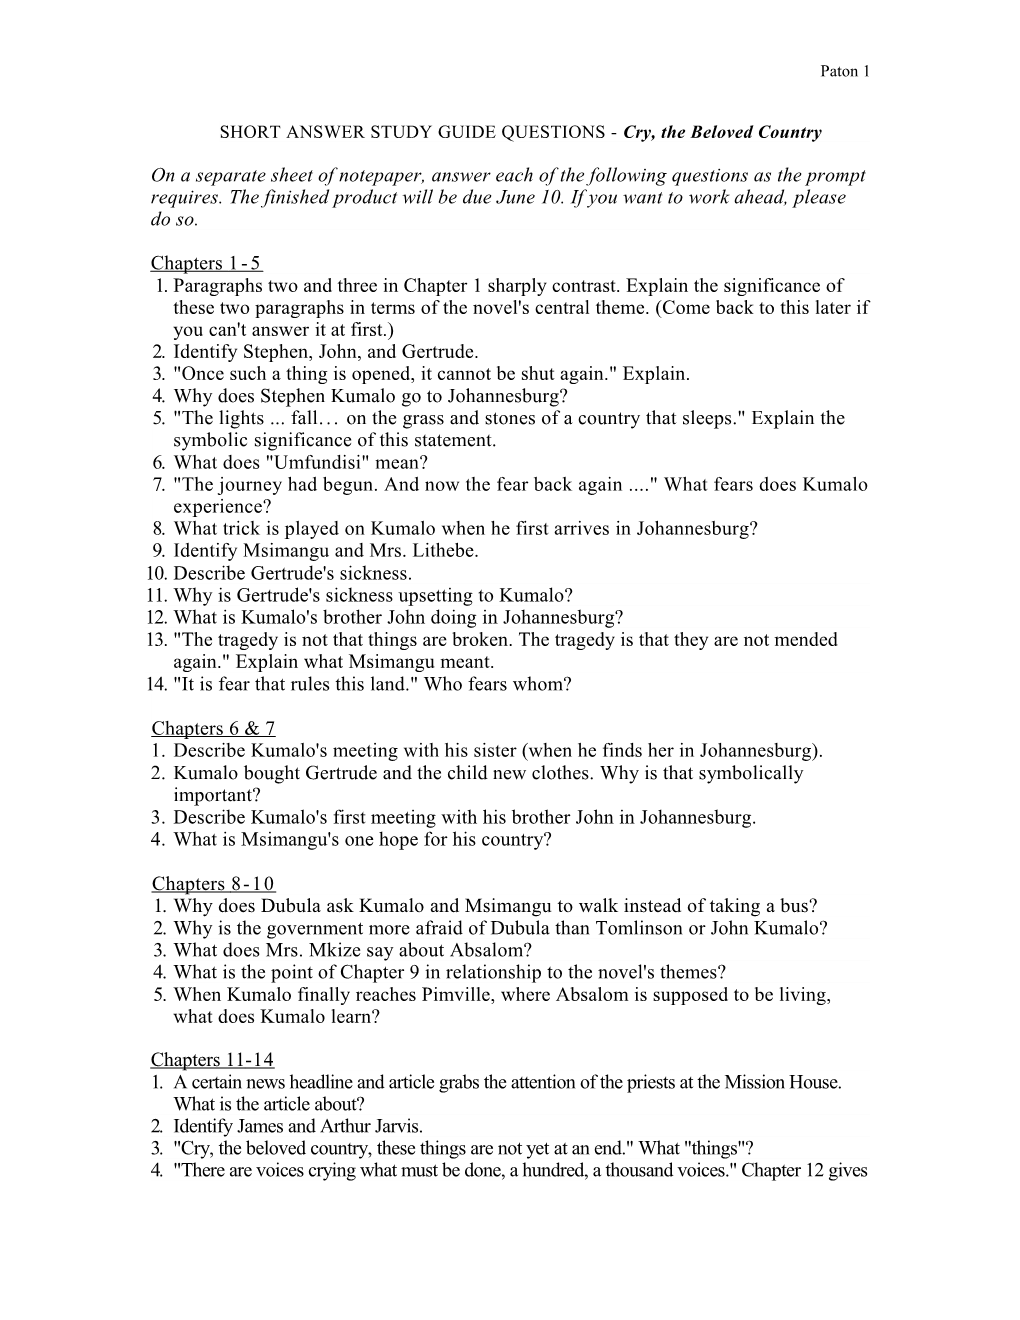 SHORT ANSWER STUDY GUIDE QUESTIONS - Cry, the Beloved Country